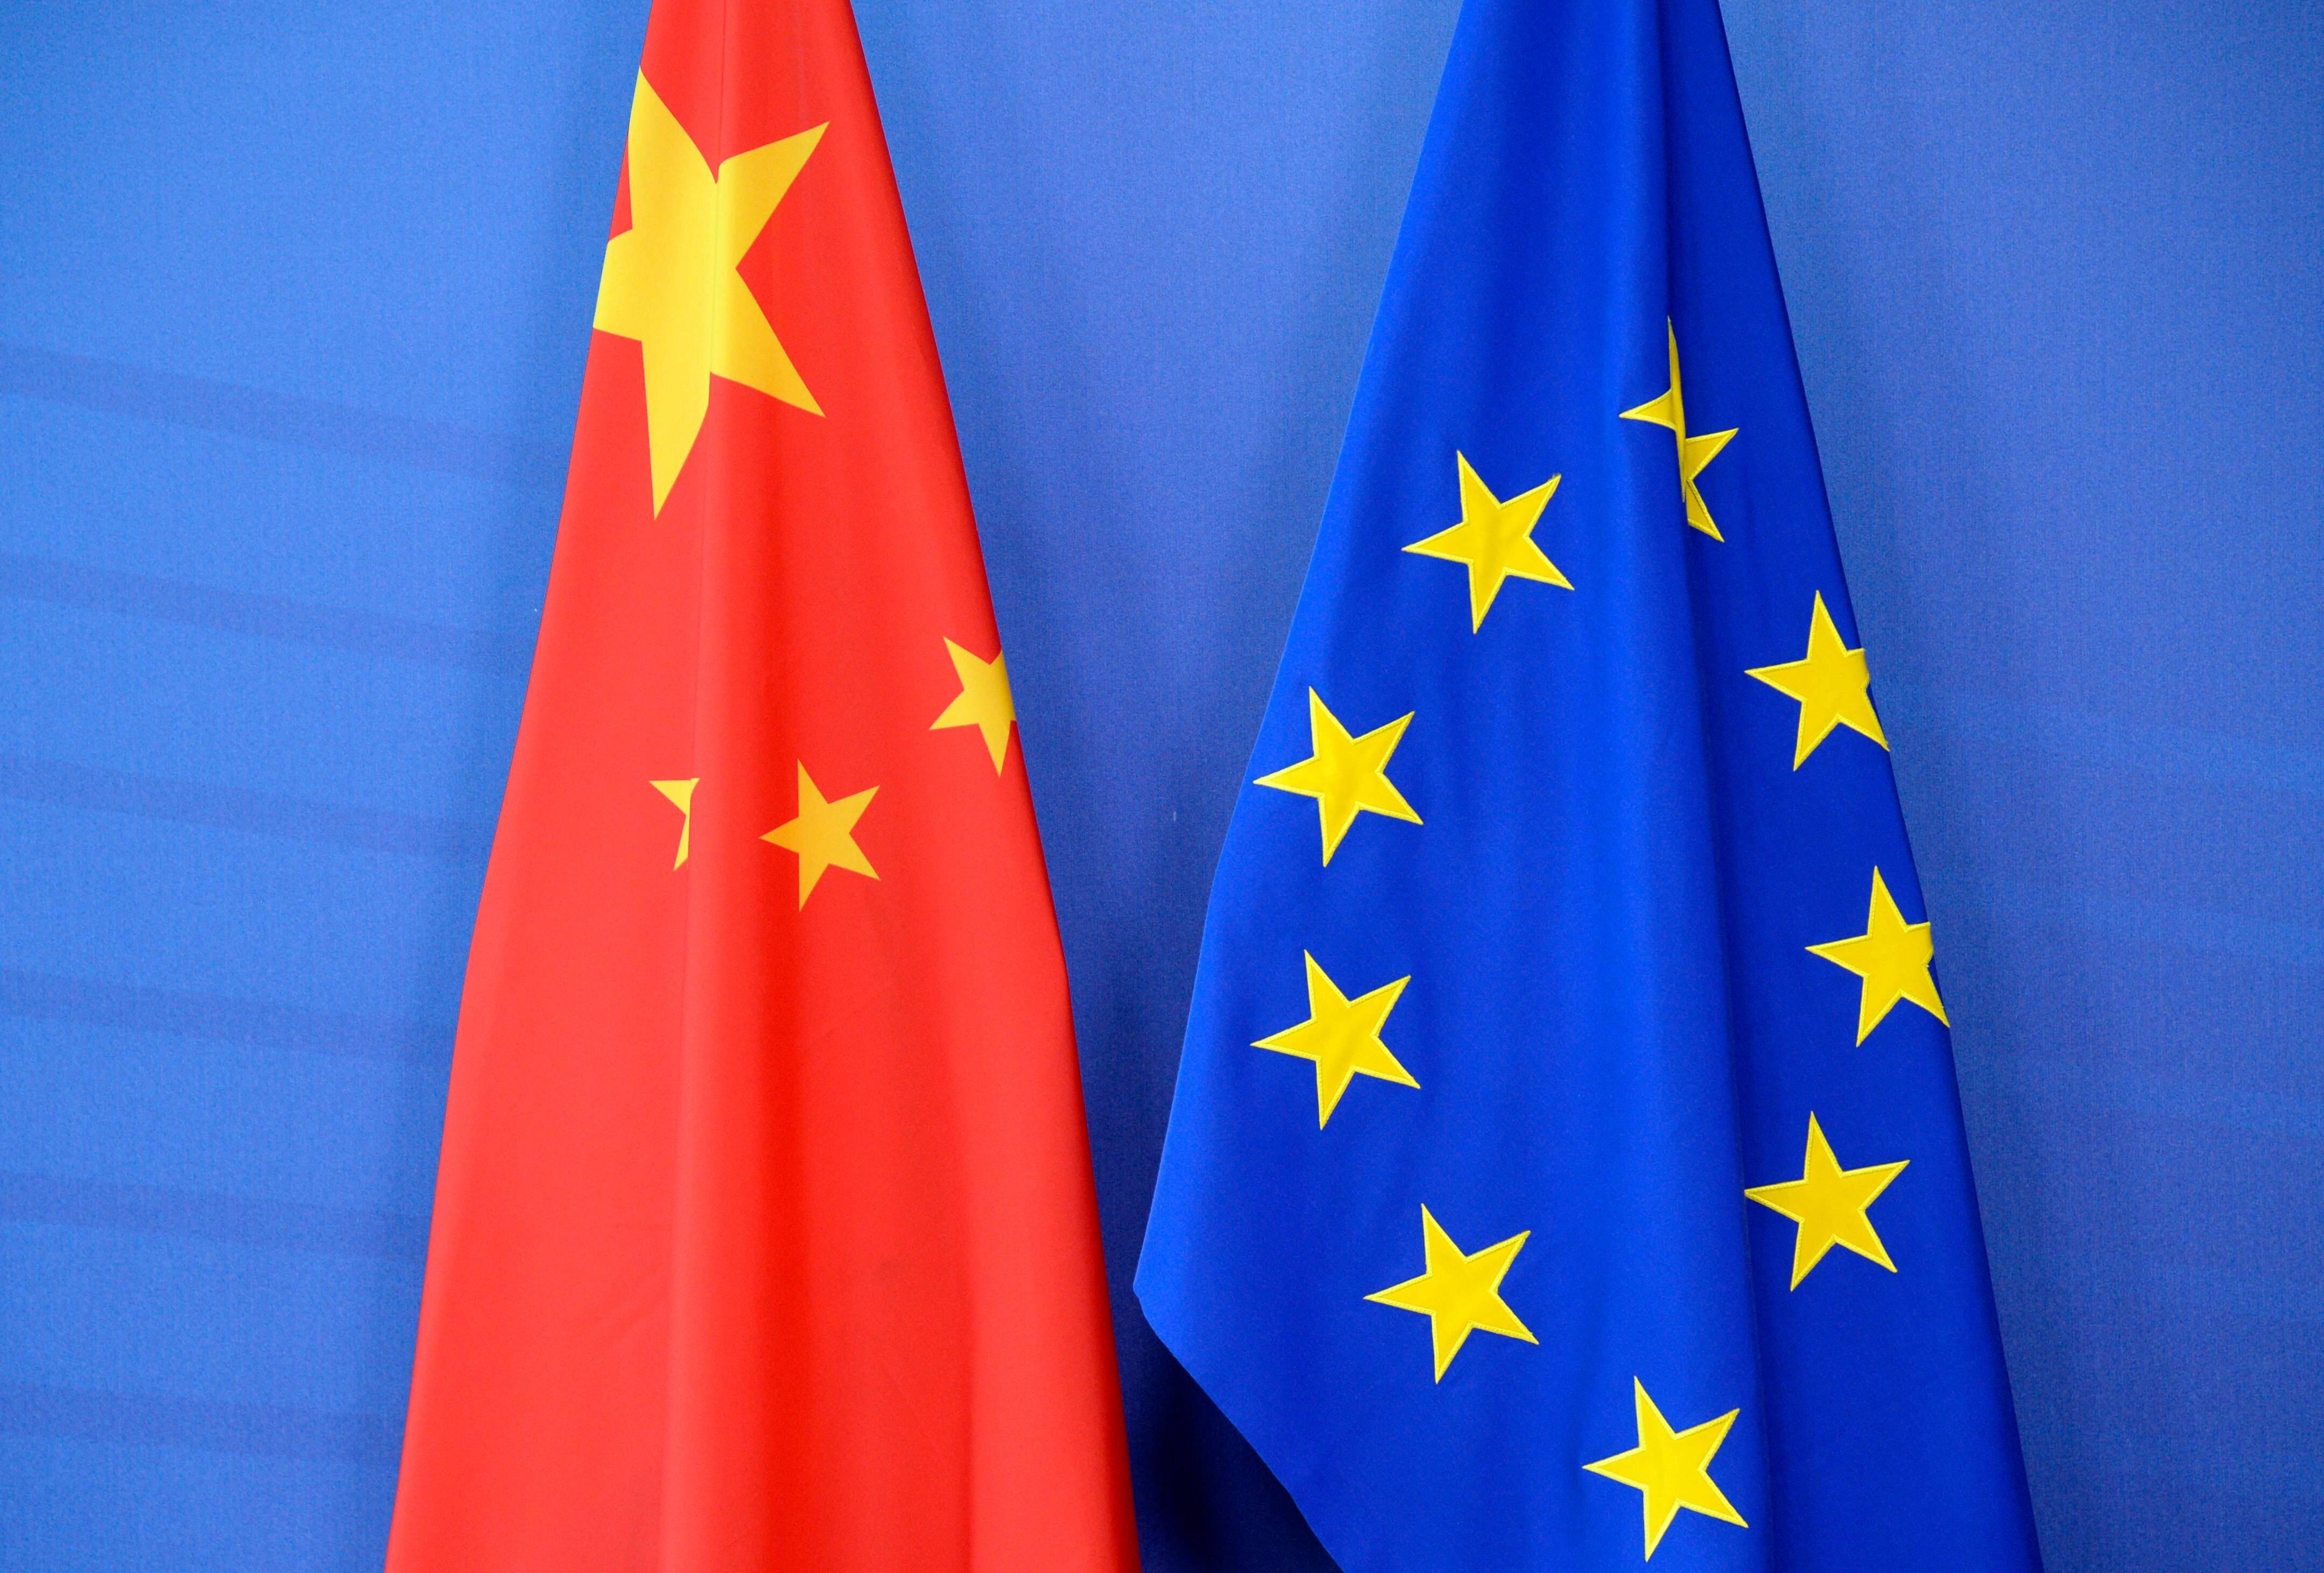 A spokesman for the Chinese mission to the European Union says the EU has no right to use the ban on BBC as a pretext to make irresponsible comments on the Hong Kong national security law. Photo: AFP